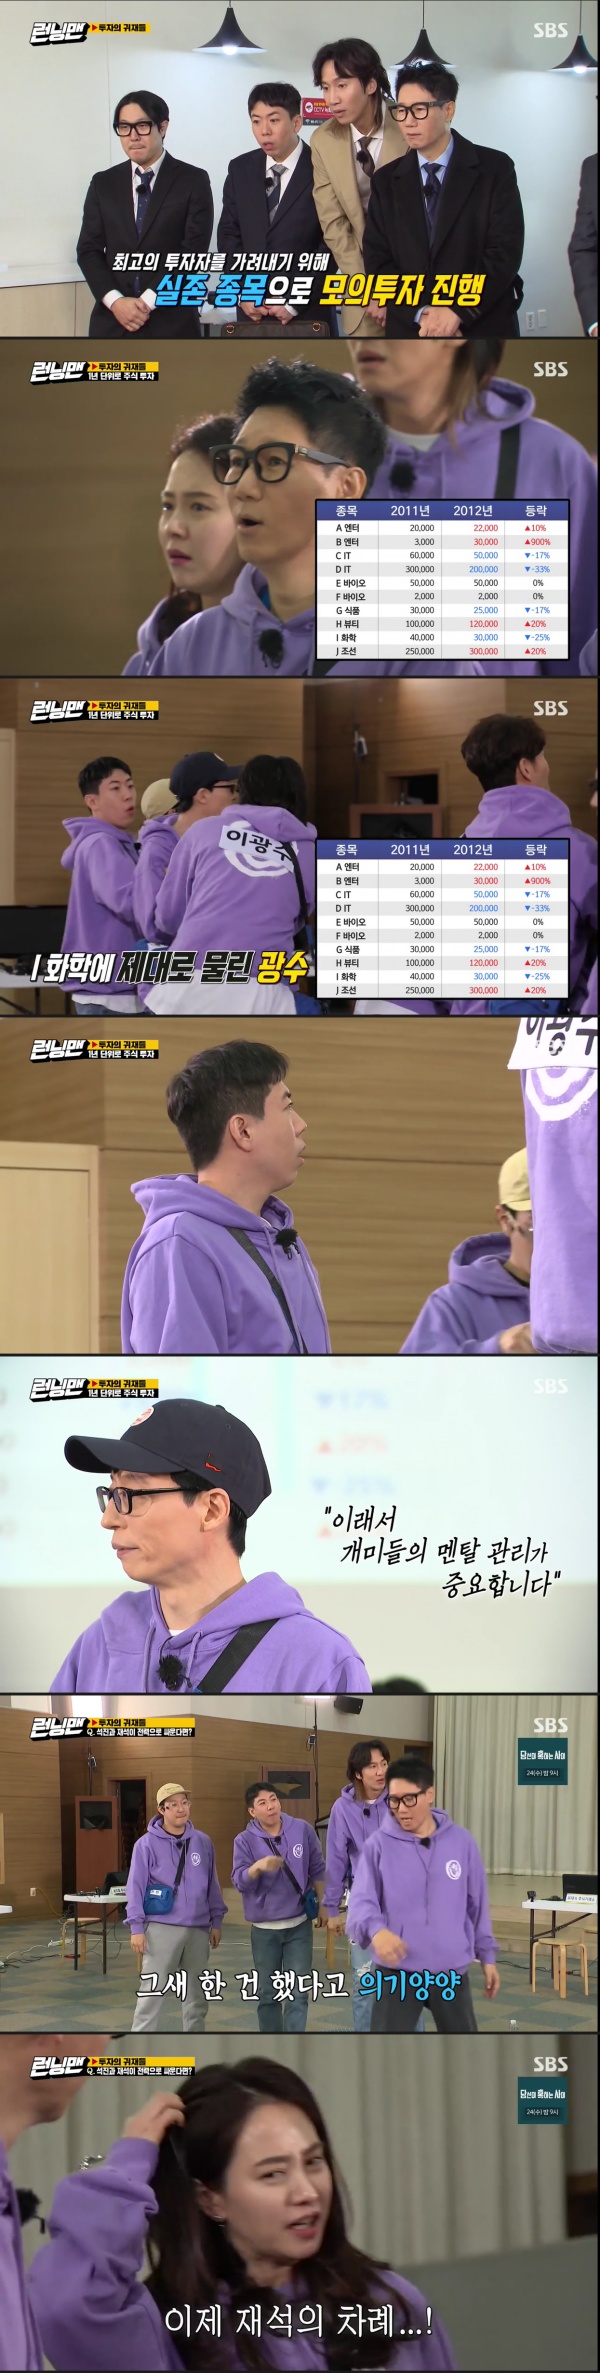 Song Ji-hyo showed the appearance of Jurin Lee.On February 21, SBS Running Man was held at Running Man Simulation Investment Competition Race, which selects investment.While opening the game ahead of the game, Yoo Jae-Suk said, Ji Suk-jin lapped the car in gray.I asked my subscribers to greet me when I saw the car on my YouTube channel. But I found out so much that I finally opened the lapping, and I paid for it and ripped it for four hours, he added.Yoo Jae-Suk gave Ji Suk-jin a warning: Its the worst adult I know.The production team commented on the mock Share special, From 2011 to 2020, we created a graph based on actual issues.The price of each stock is arbitrarily made by the production team during the price of the year. We will actually calculate 20 minutes as one year of Share investment.You can purchase the information you need on the Information Exchange as a point. I will carry out a mission to acquire points. Song Ji-hyo said in front of the production team, I dont know Share and showed a Zureeni (Share+ Children) attitude.Song Ji-hyo, who listened to the explanation, said, Then I will buy C, D. And when the crew said, How many weeks? I do not know any Share.Is not this the way you fall into Share later? On this day, the members conducted an investment game based on the stock index data of actual companies from 2010 to 2020.A total of 10 stocks were released under the initials, and the members invested 500,000 won in virtual money.Ji Suk-jin Jeon So-min bought Information using points from the pregame.Ji Suk-jin all In Share on the news that HBeauty was favorable, and Jeon So-min also bought HBeauty.Ji Suk-jin then sprayed fake information around the Enter is good, and Yang Se-chan bought All In in B-Enter, and Jeon So-min and Yoo Jae-Suk also made small purchases.Ji Suk-jin has been carrying out Share Information, which he has been through since he sprayed fake information. He has been delisted but has been through three times.The community nickname was red hands, which made the surroundings furious.After a virtual year, in 2011, B-enter had a return of 900%.Yang Se-chan became a thunderstorm rich with 540% proceeds, and Jurin Jeon So-min also posted a 328% return.Lee Kwang-soo, who had been all in after hearing the chemistry information of Yoo Jae-Suk, laughed at the loss.On the other hand, SBS Running Man is broadcast every Sunday at 5 pm.